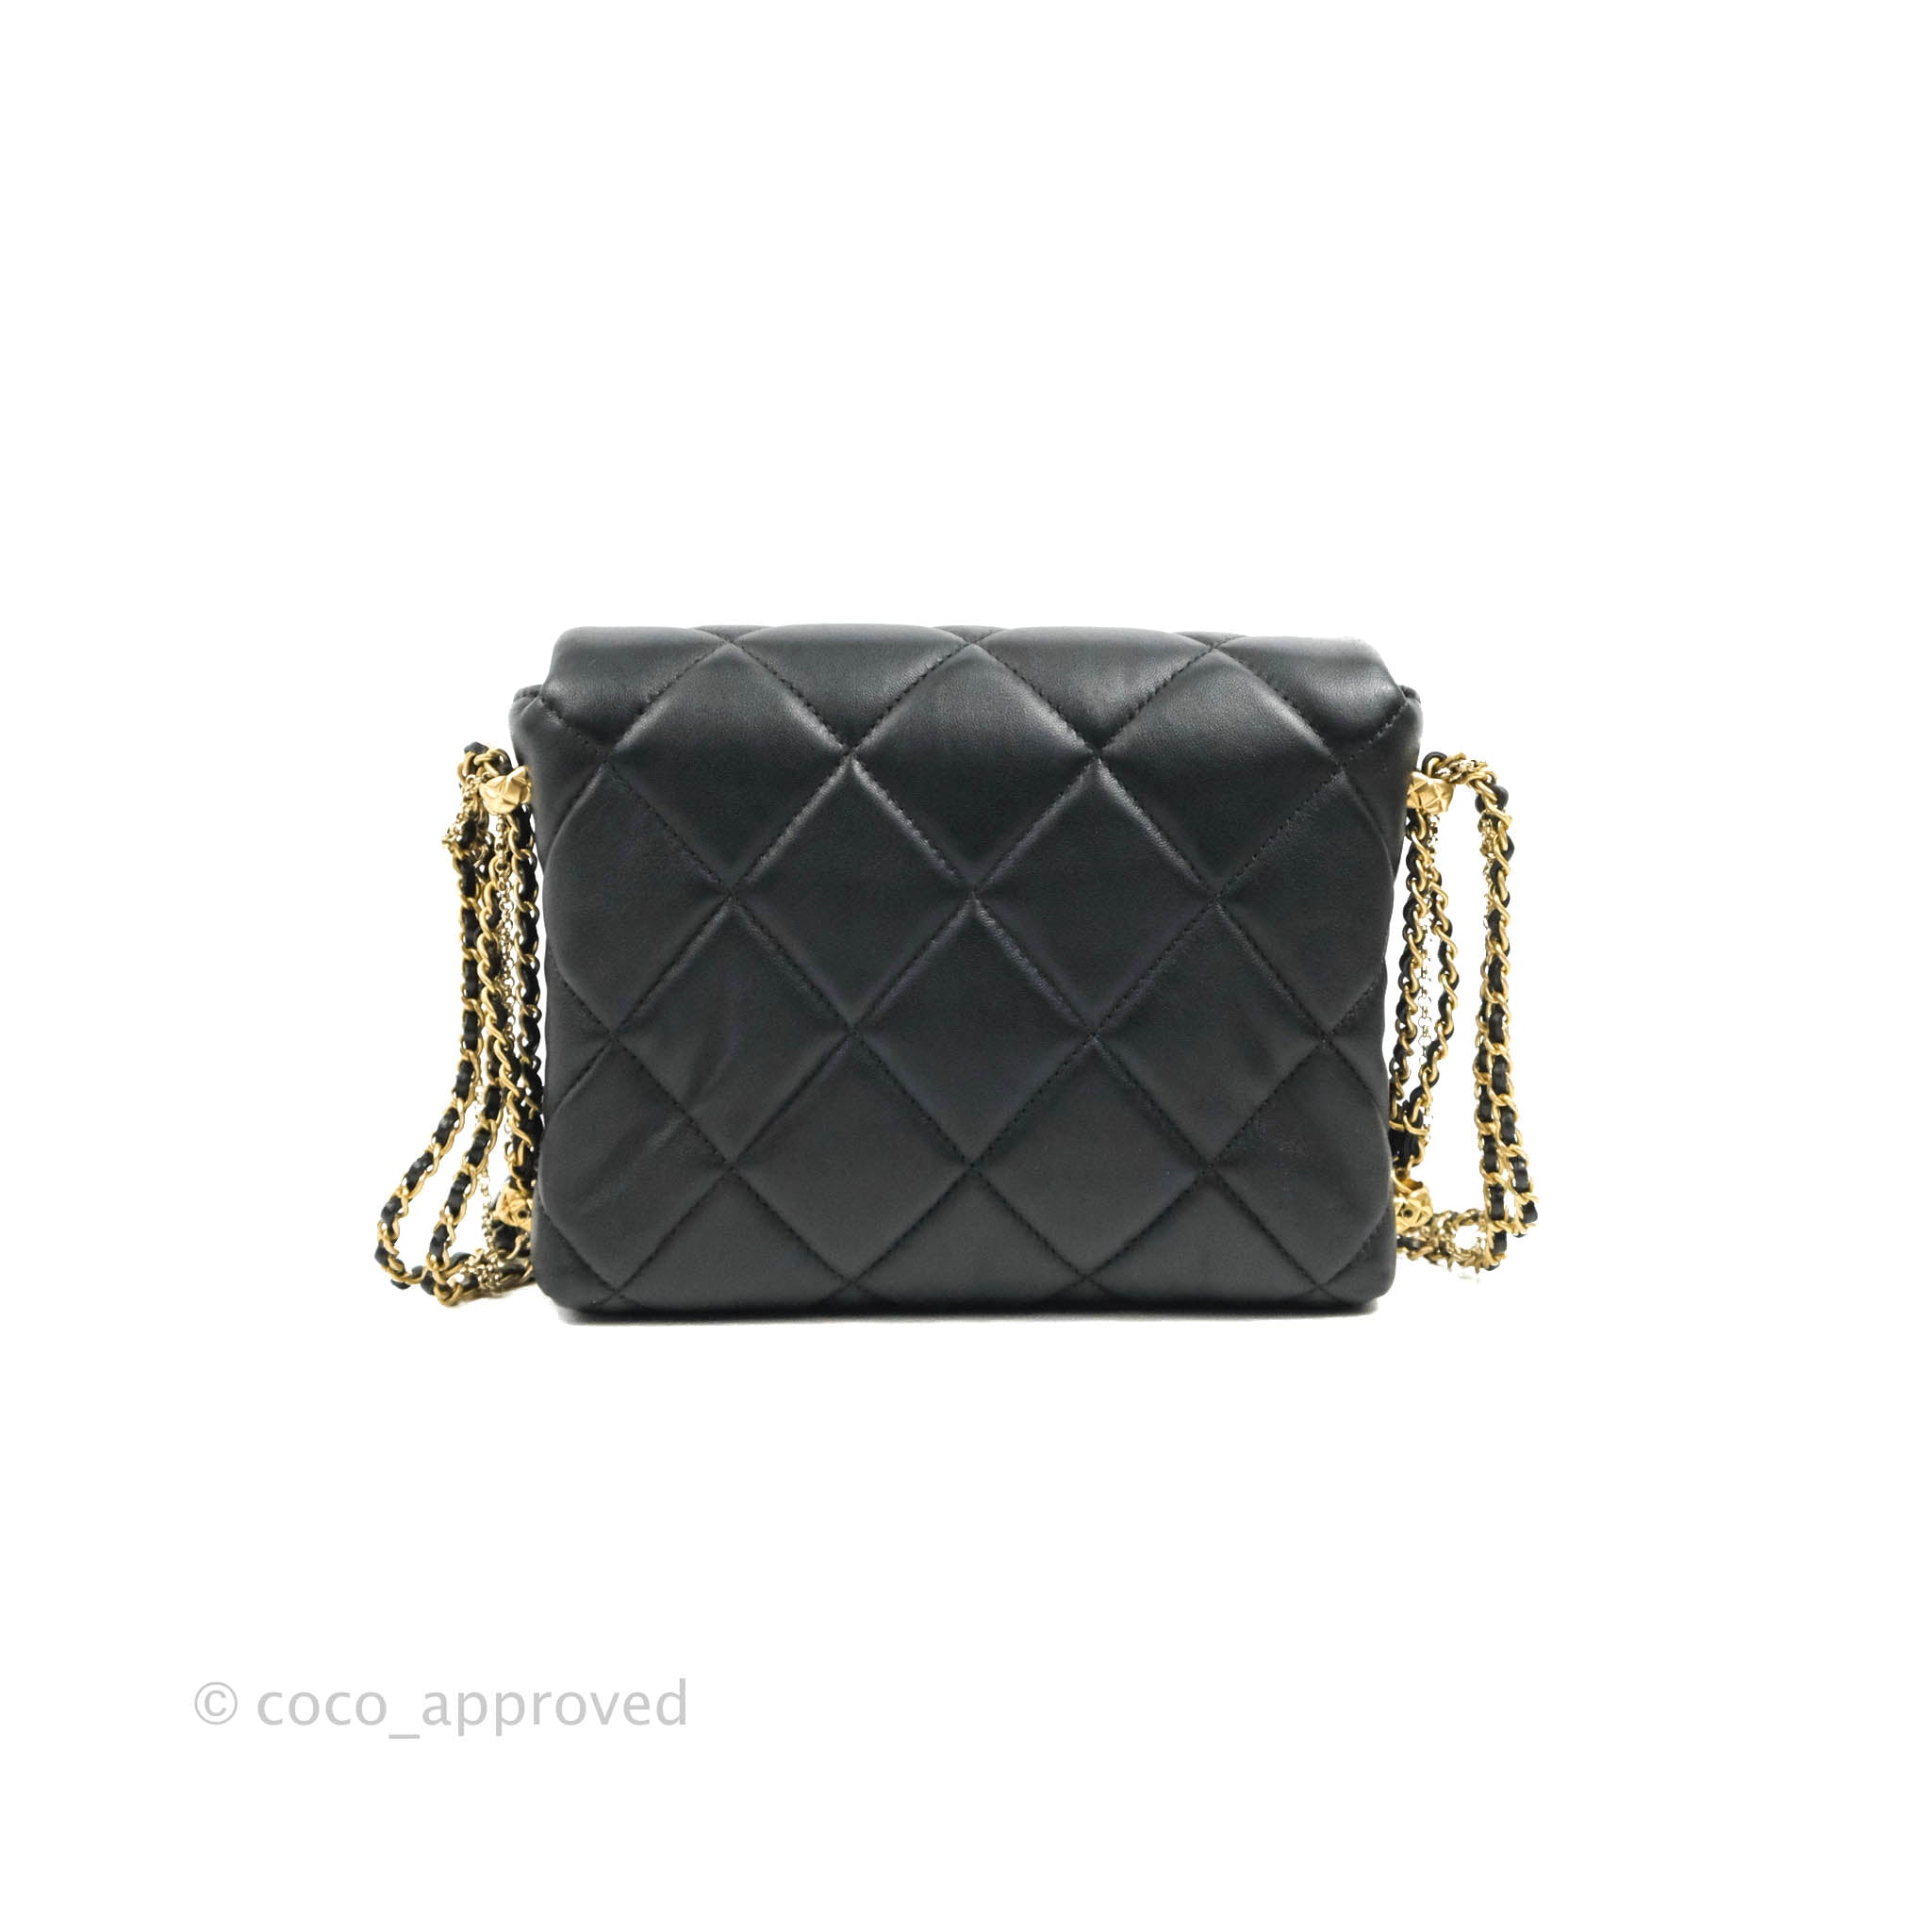 chanel leather bag